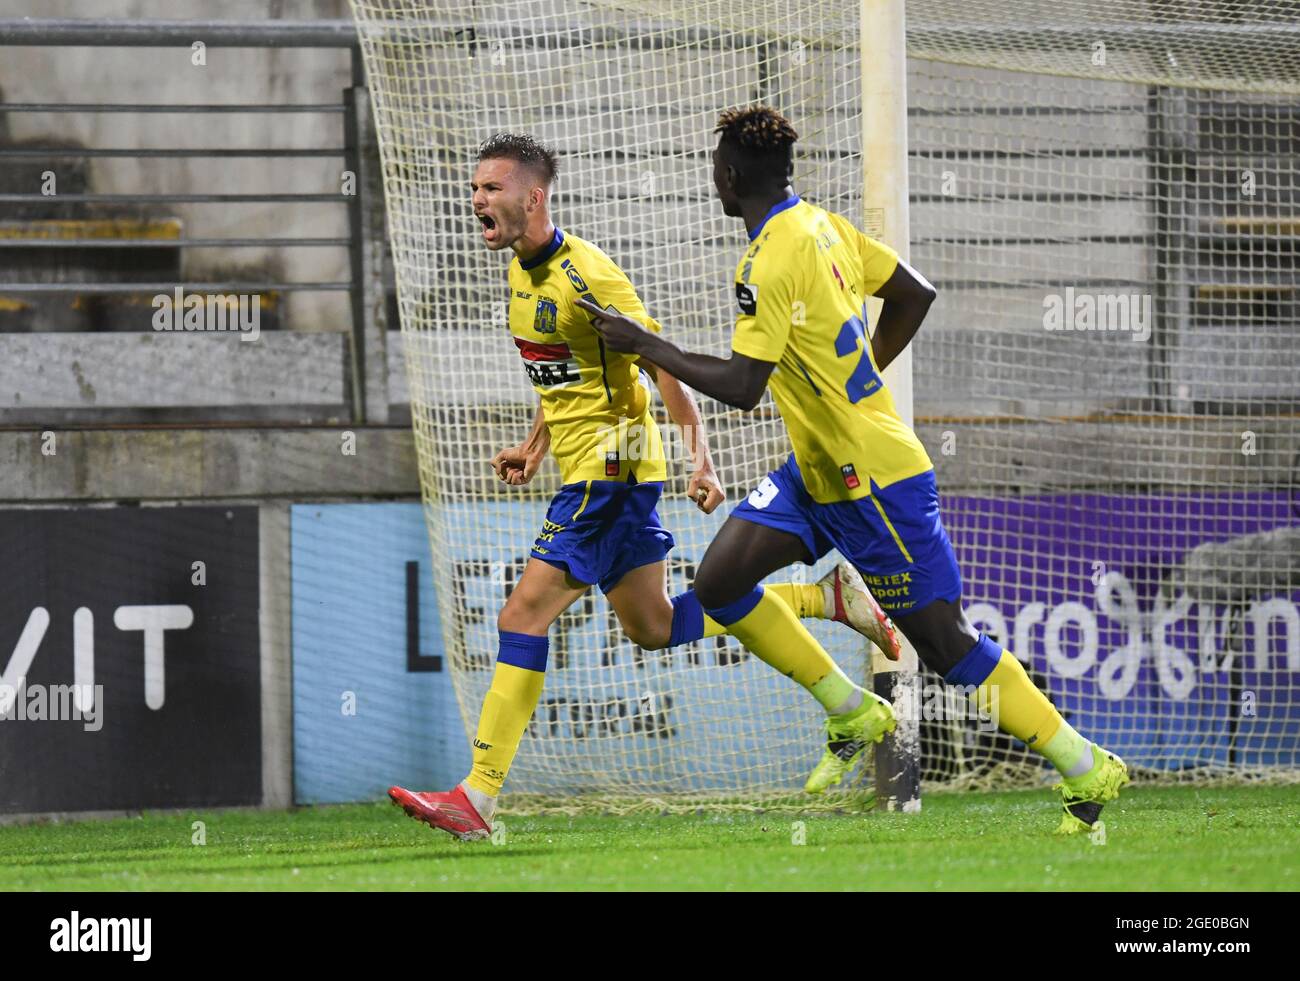 Westerlo's Daan Driesen celebrates after scoring during a soccer match between Royal Excelsior Virton and KVC Westerlo, Sunday 15 August 2021 in Virto Stock Photo